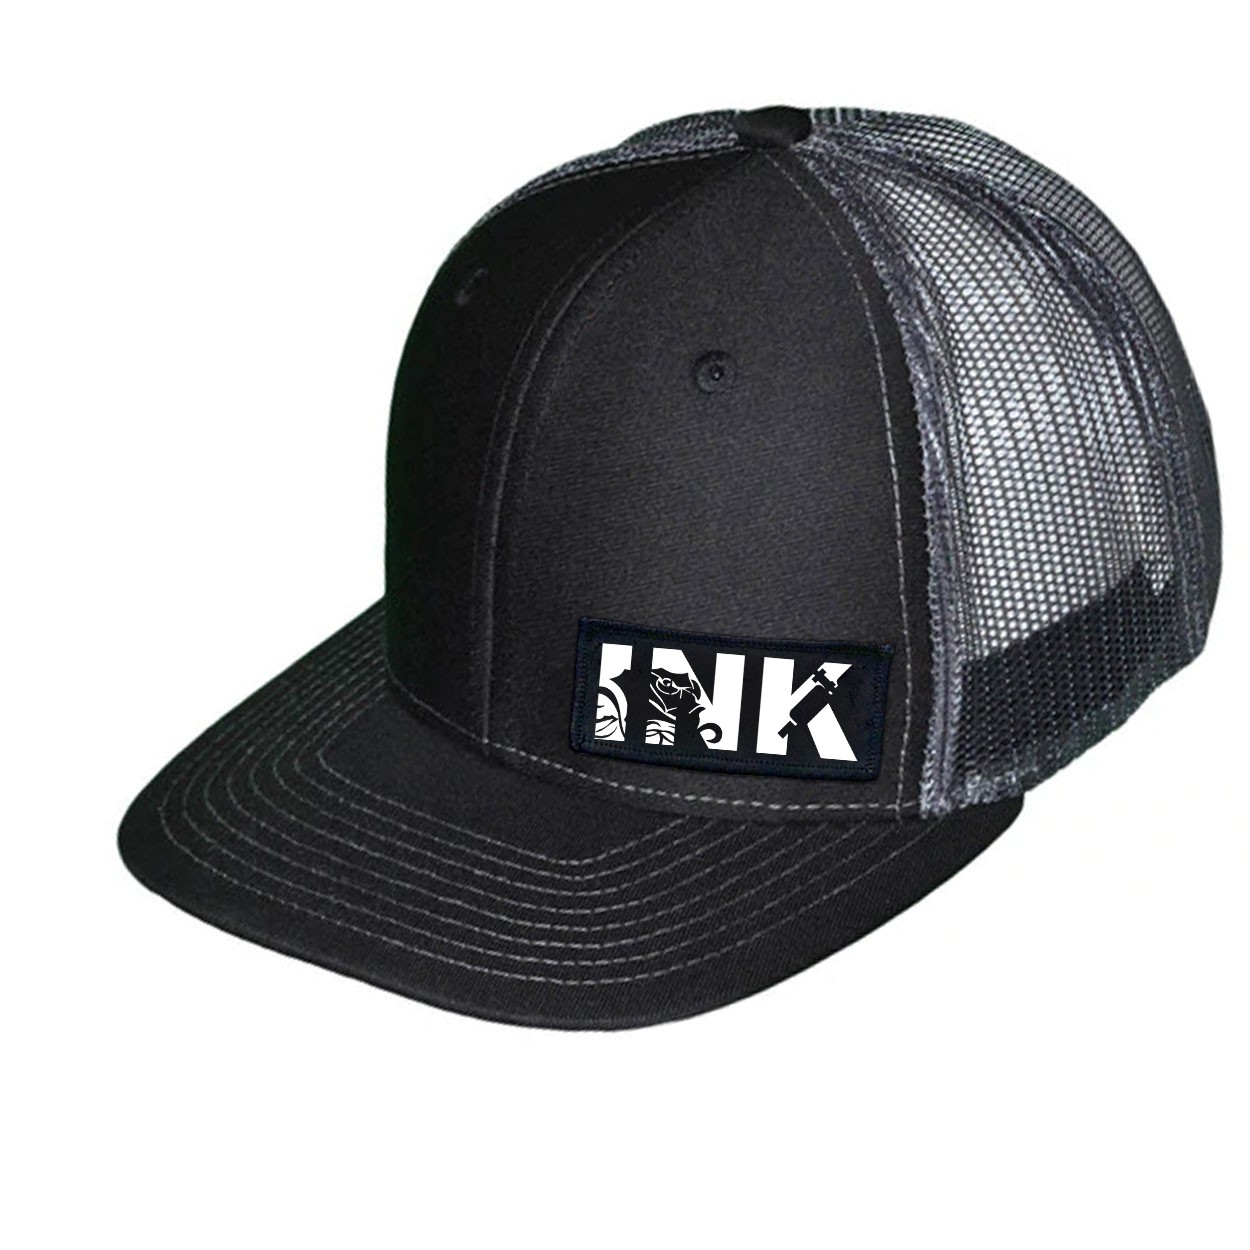 Ink Tattoo Logo Night Out Woven Patch Snapback Trucker Hat Black/Gray